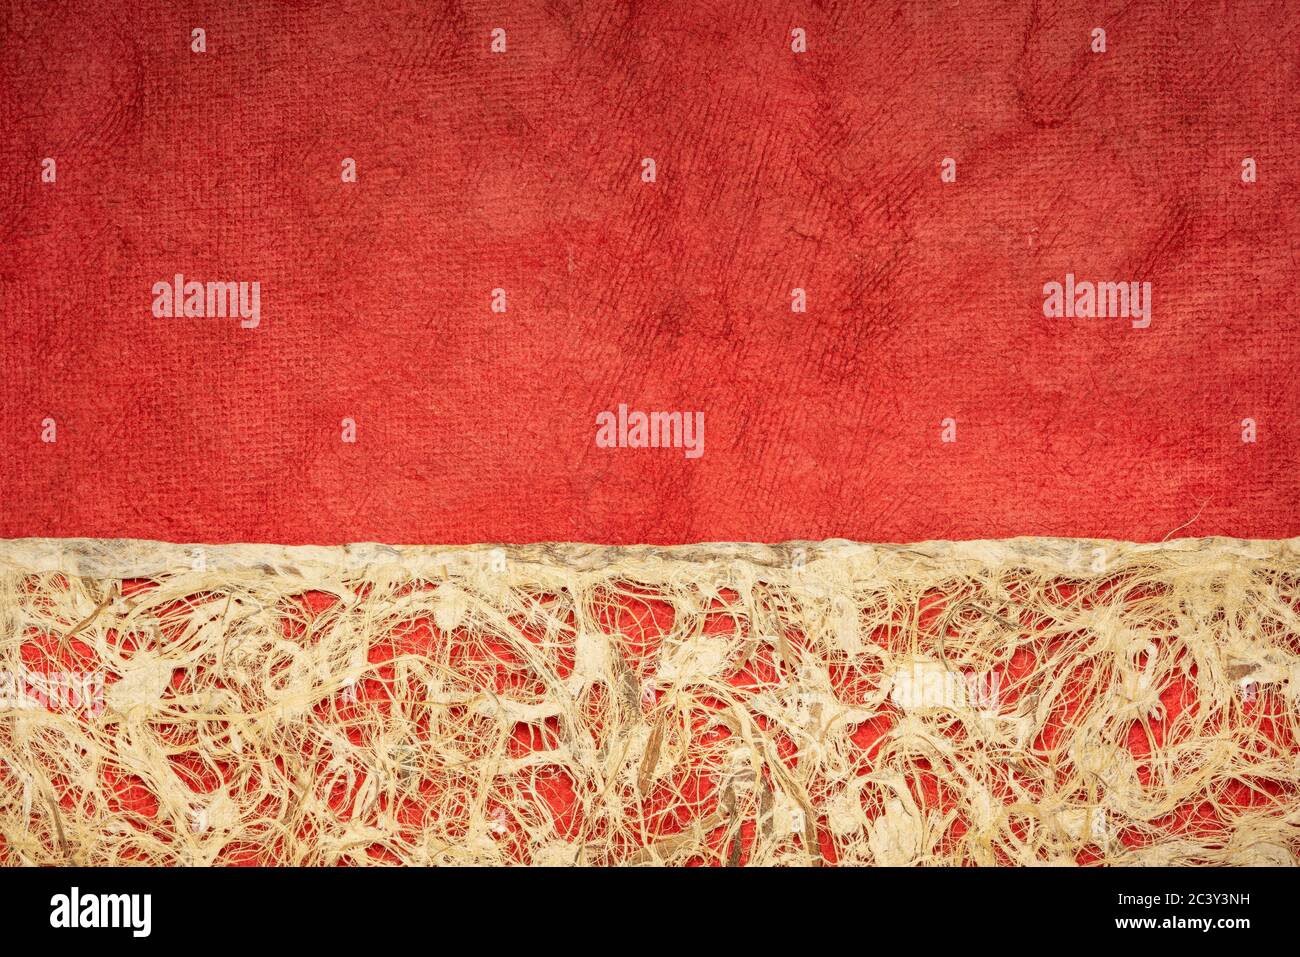 Amate bark paper with lace design against red huun paper.  This ancient paper dates back to pre-Columbian and Meso-American times and is still hand ma Stock Photo